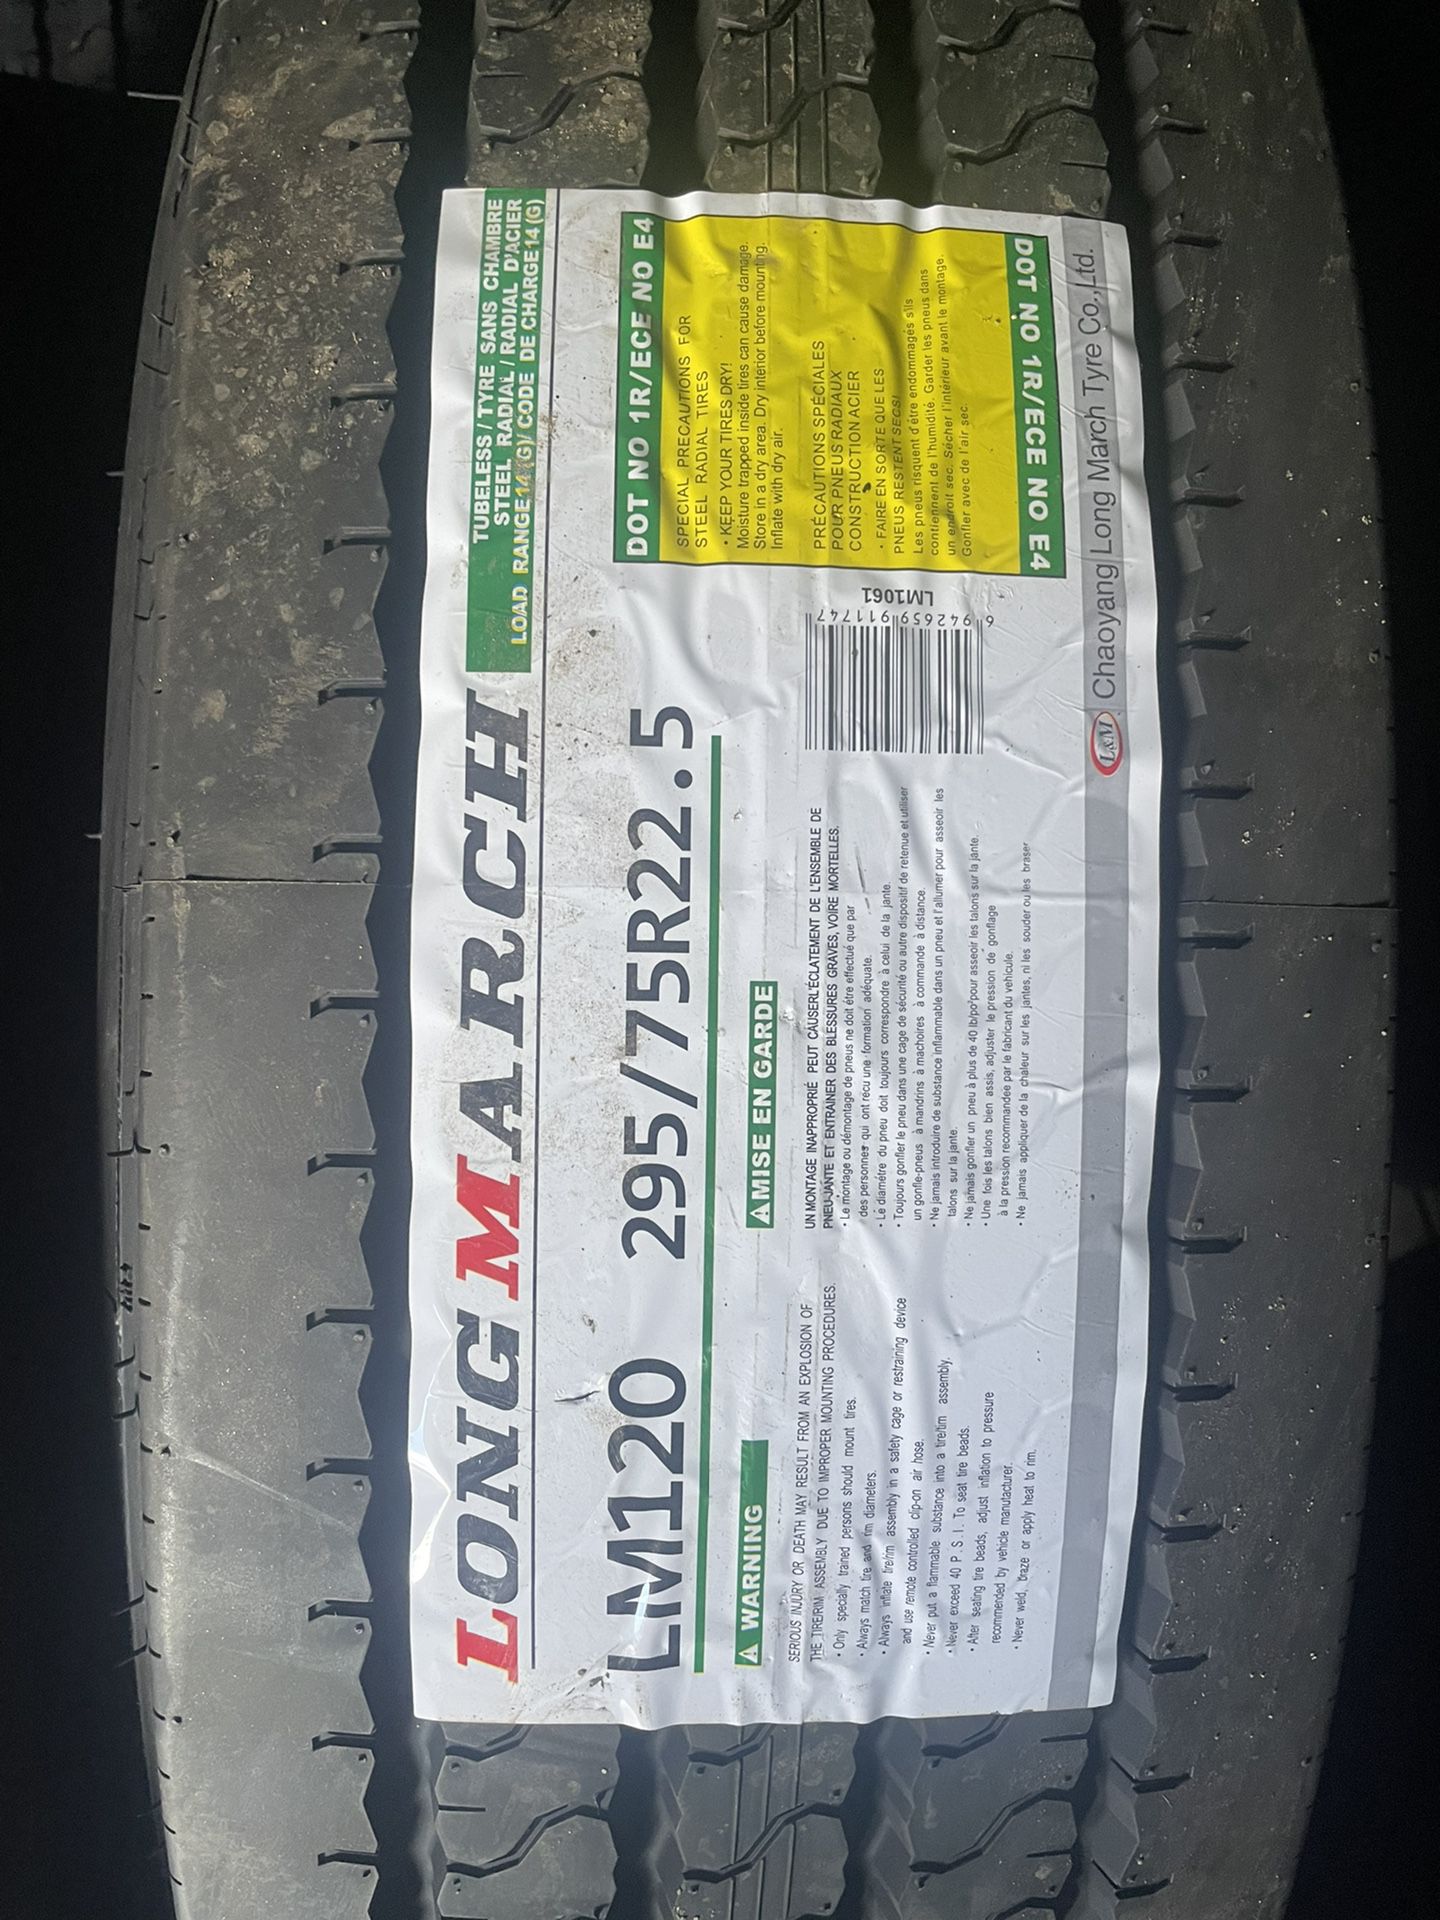 LONG MARCH LM120 295/75R 22.4 14PLY